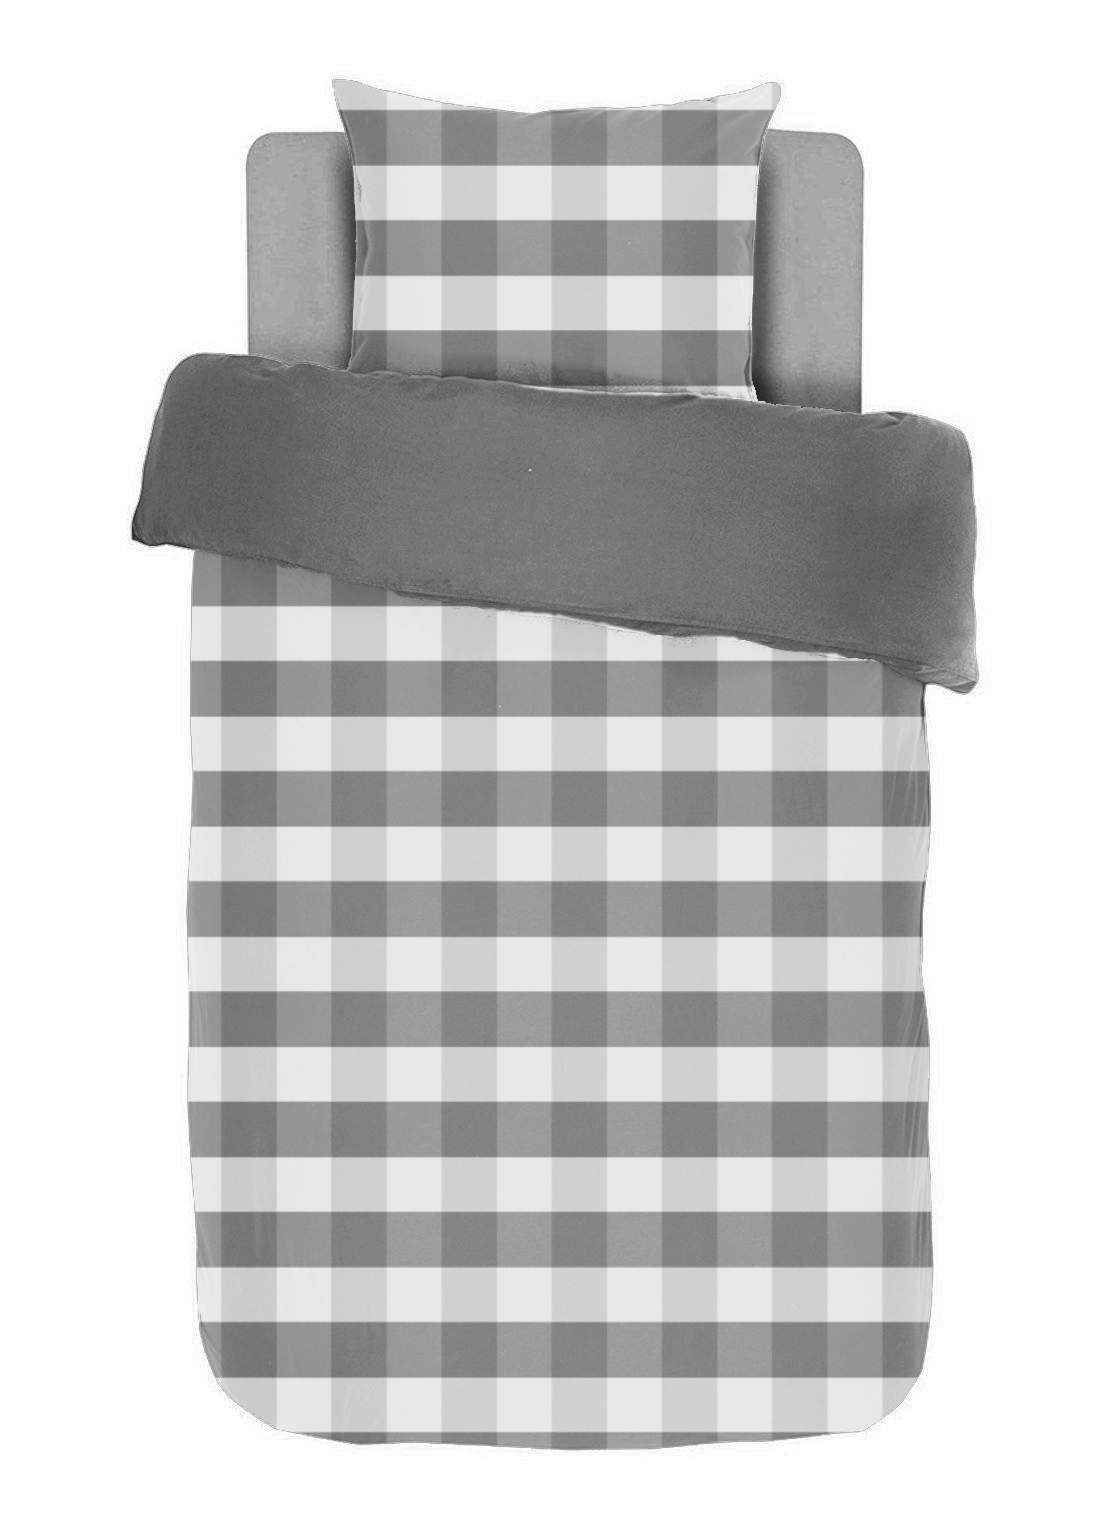 Duvet cover EMMA, Stone washed check cotton, 140x200, grey